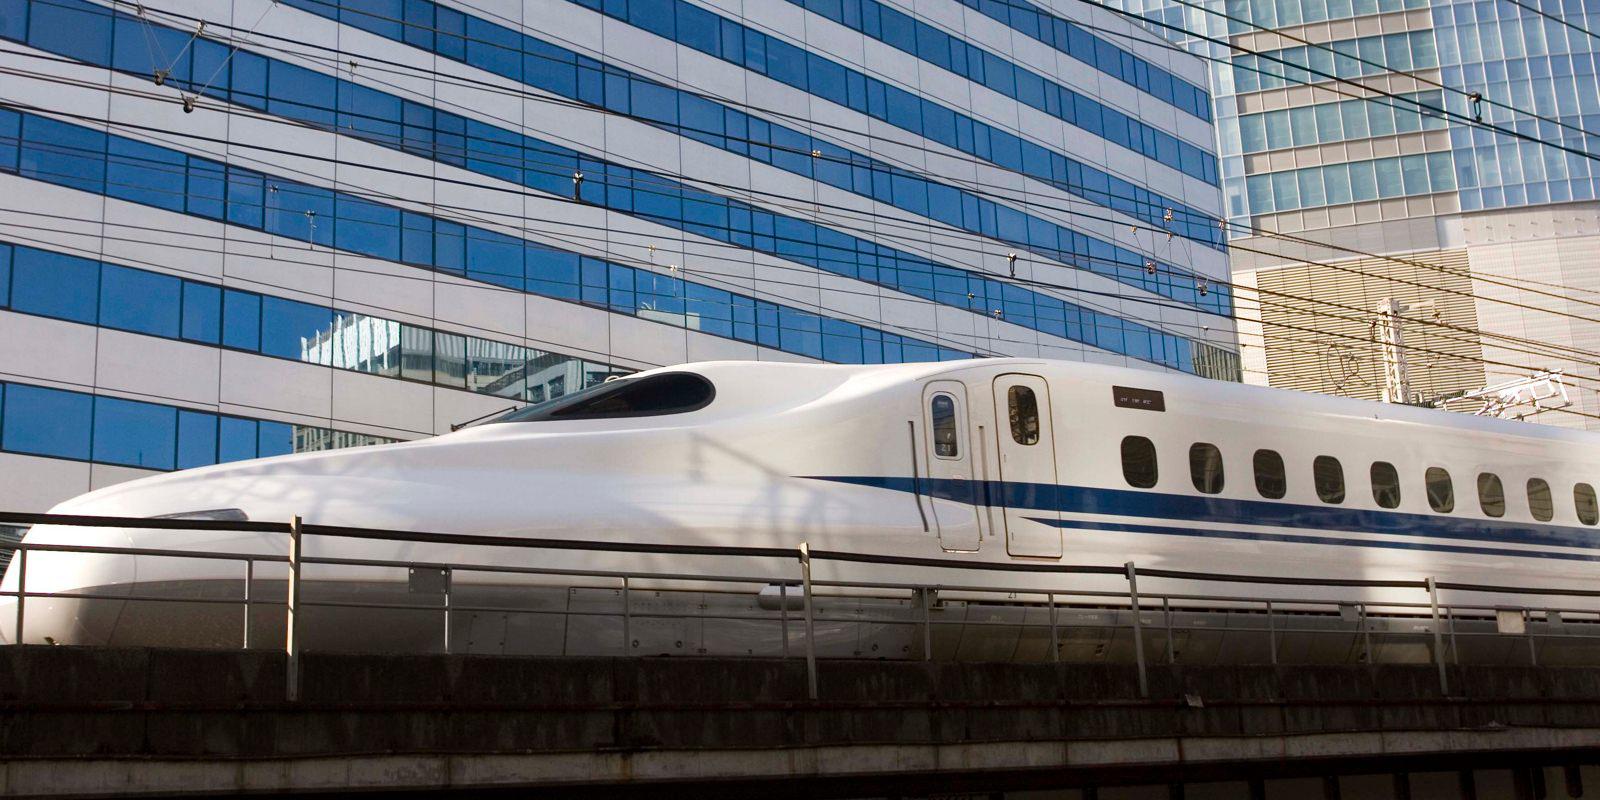 Texas Central plans to use Japanese-style Shinkansen bullet trains, which have been used in Japan for a half-century, to connect Houston and Dallas. F